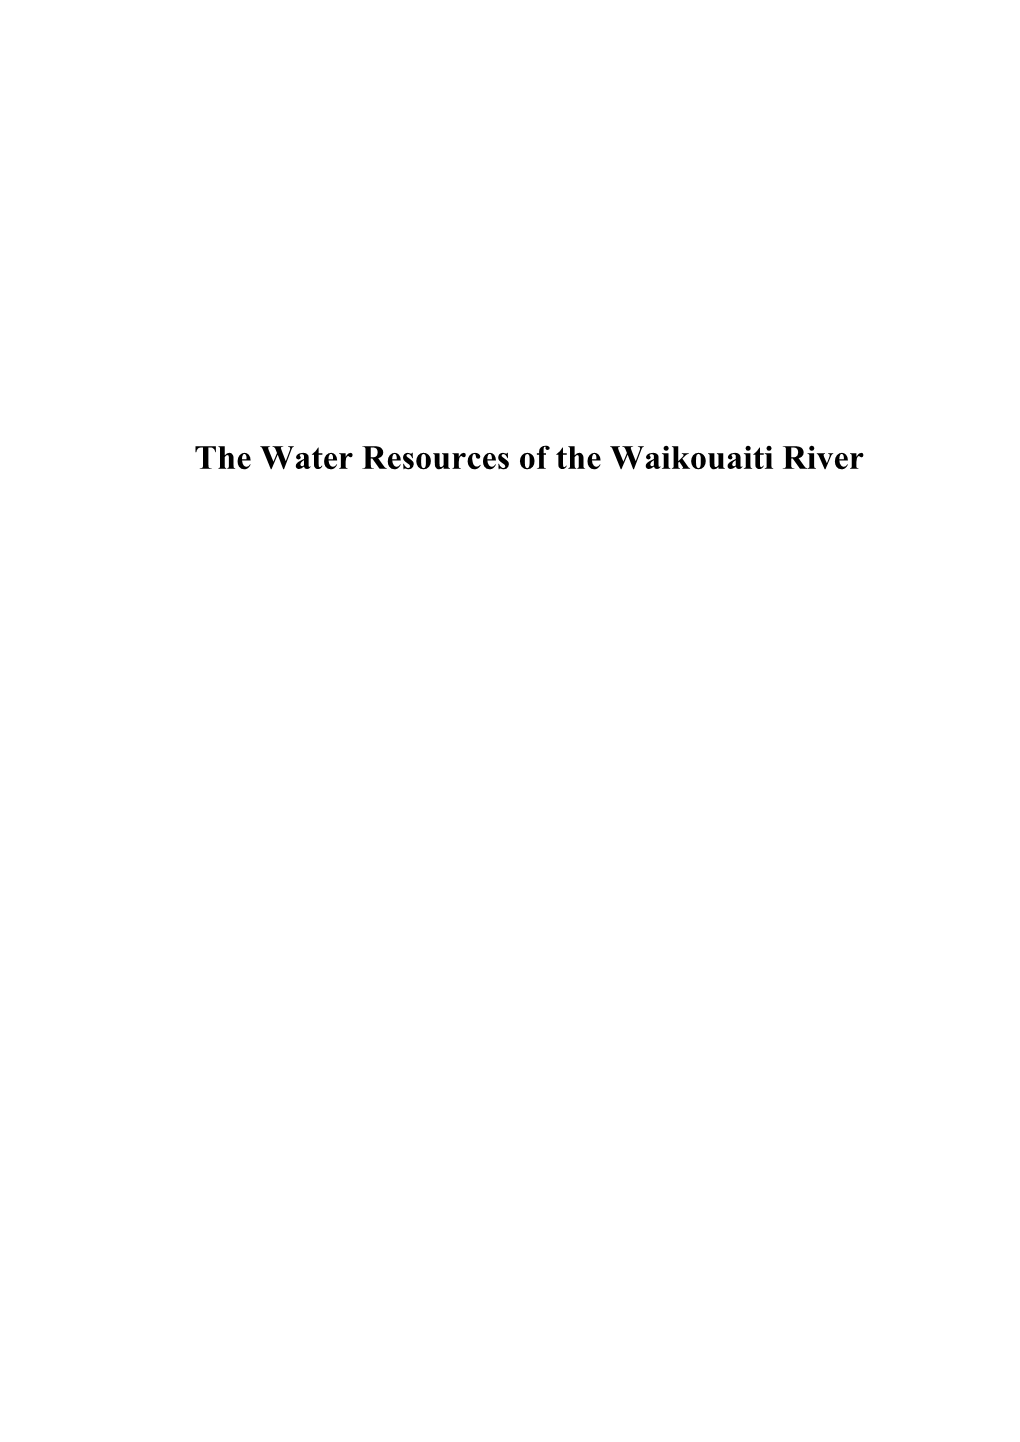 The Water Resources of the Waikouaiti River